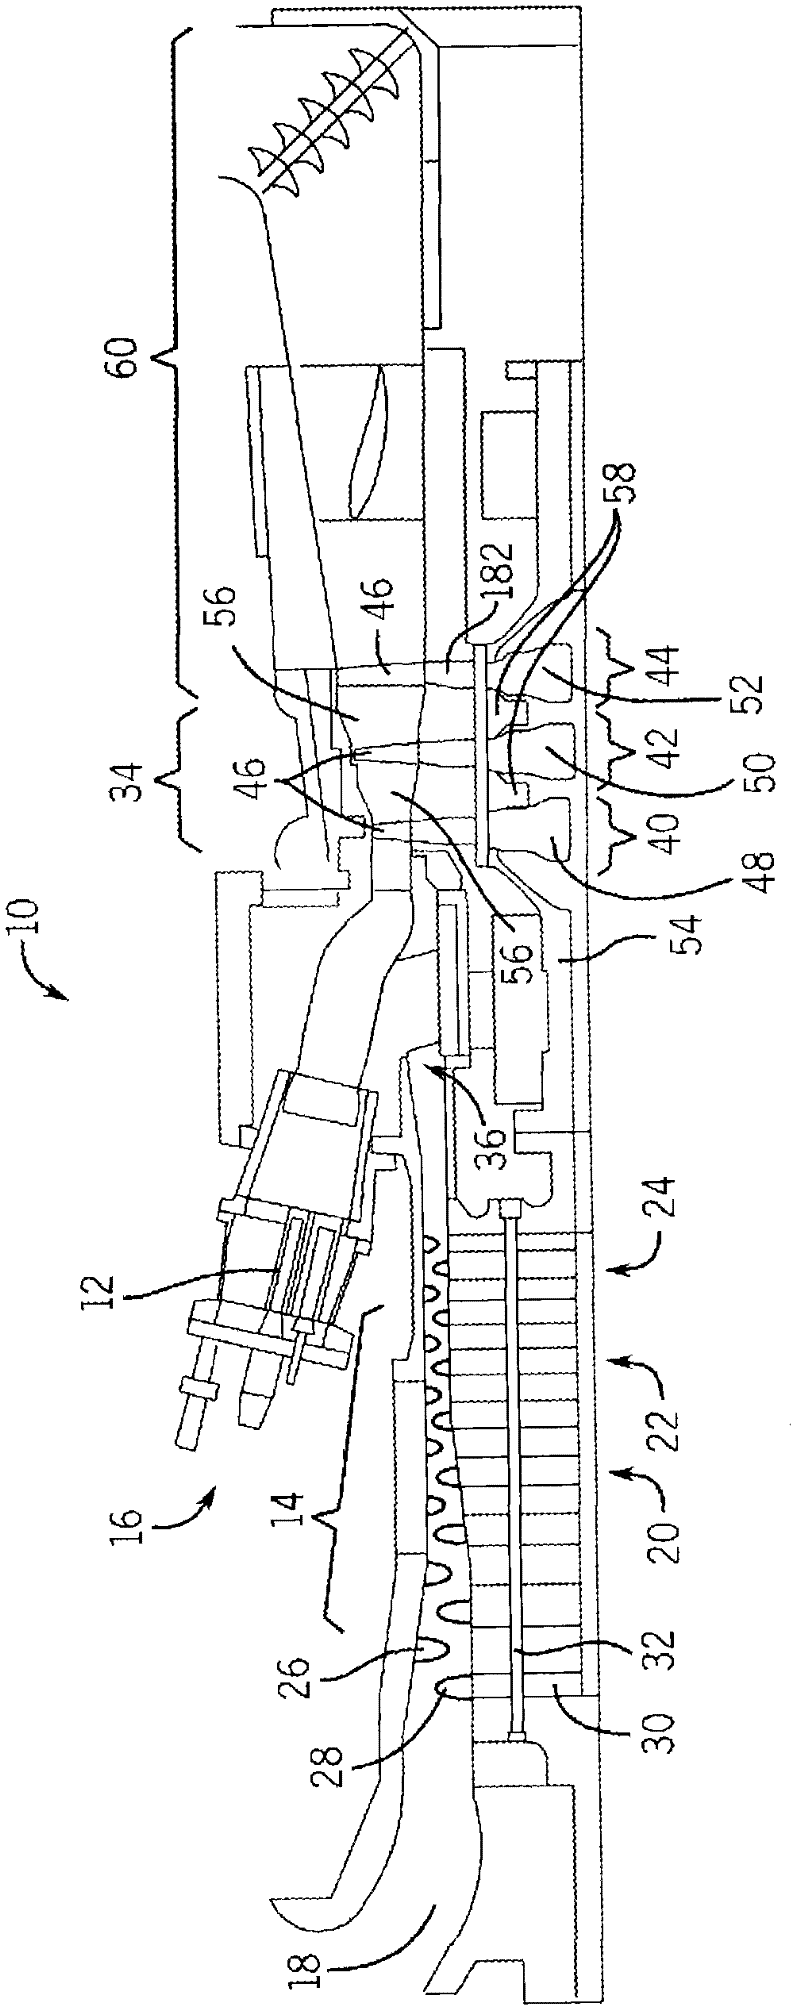 System and method for hybrid risk modeling of turbomachinery